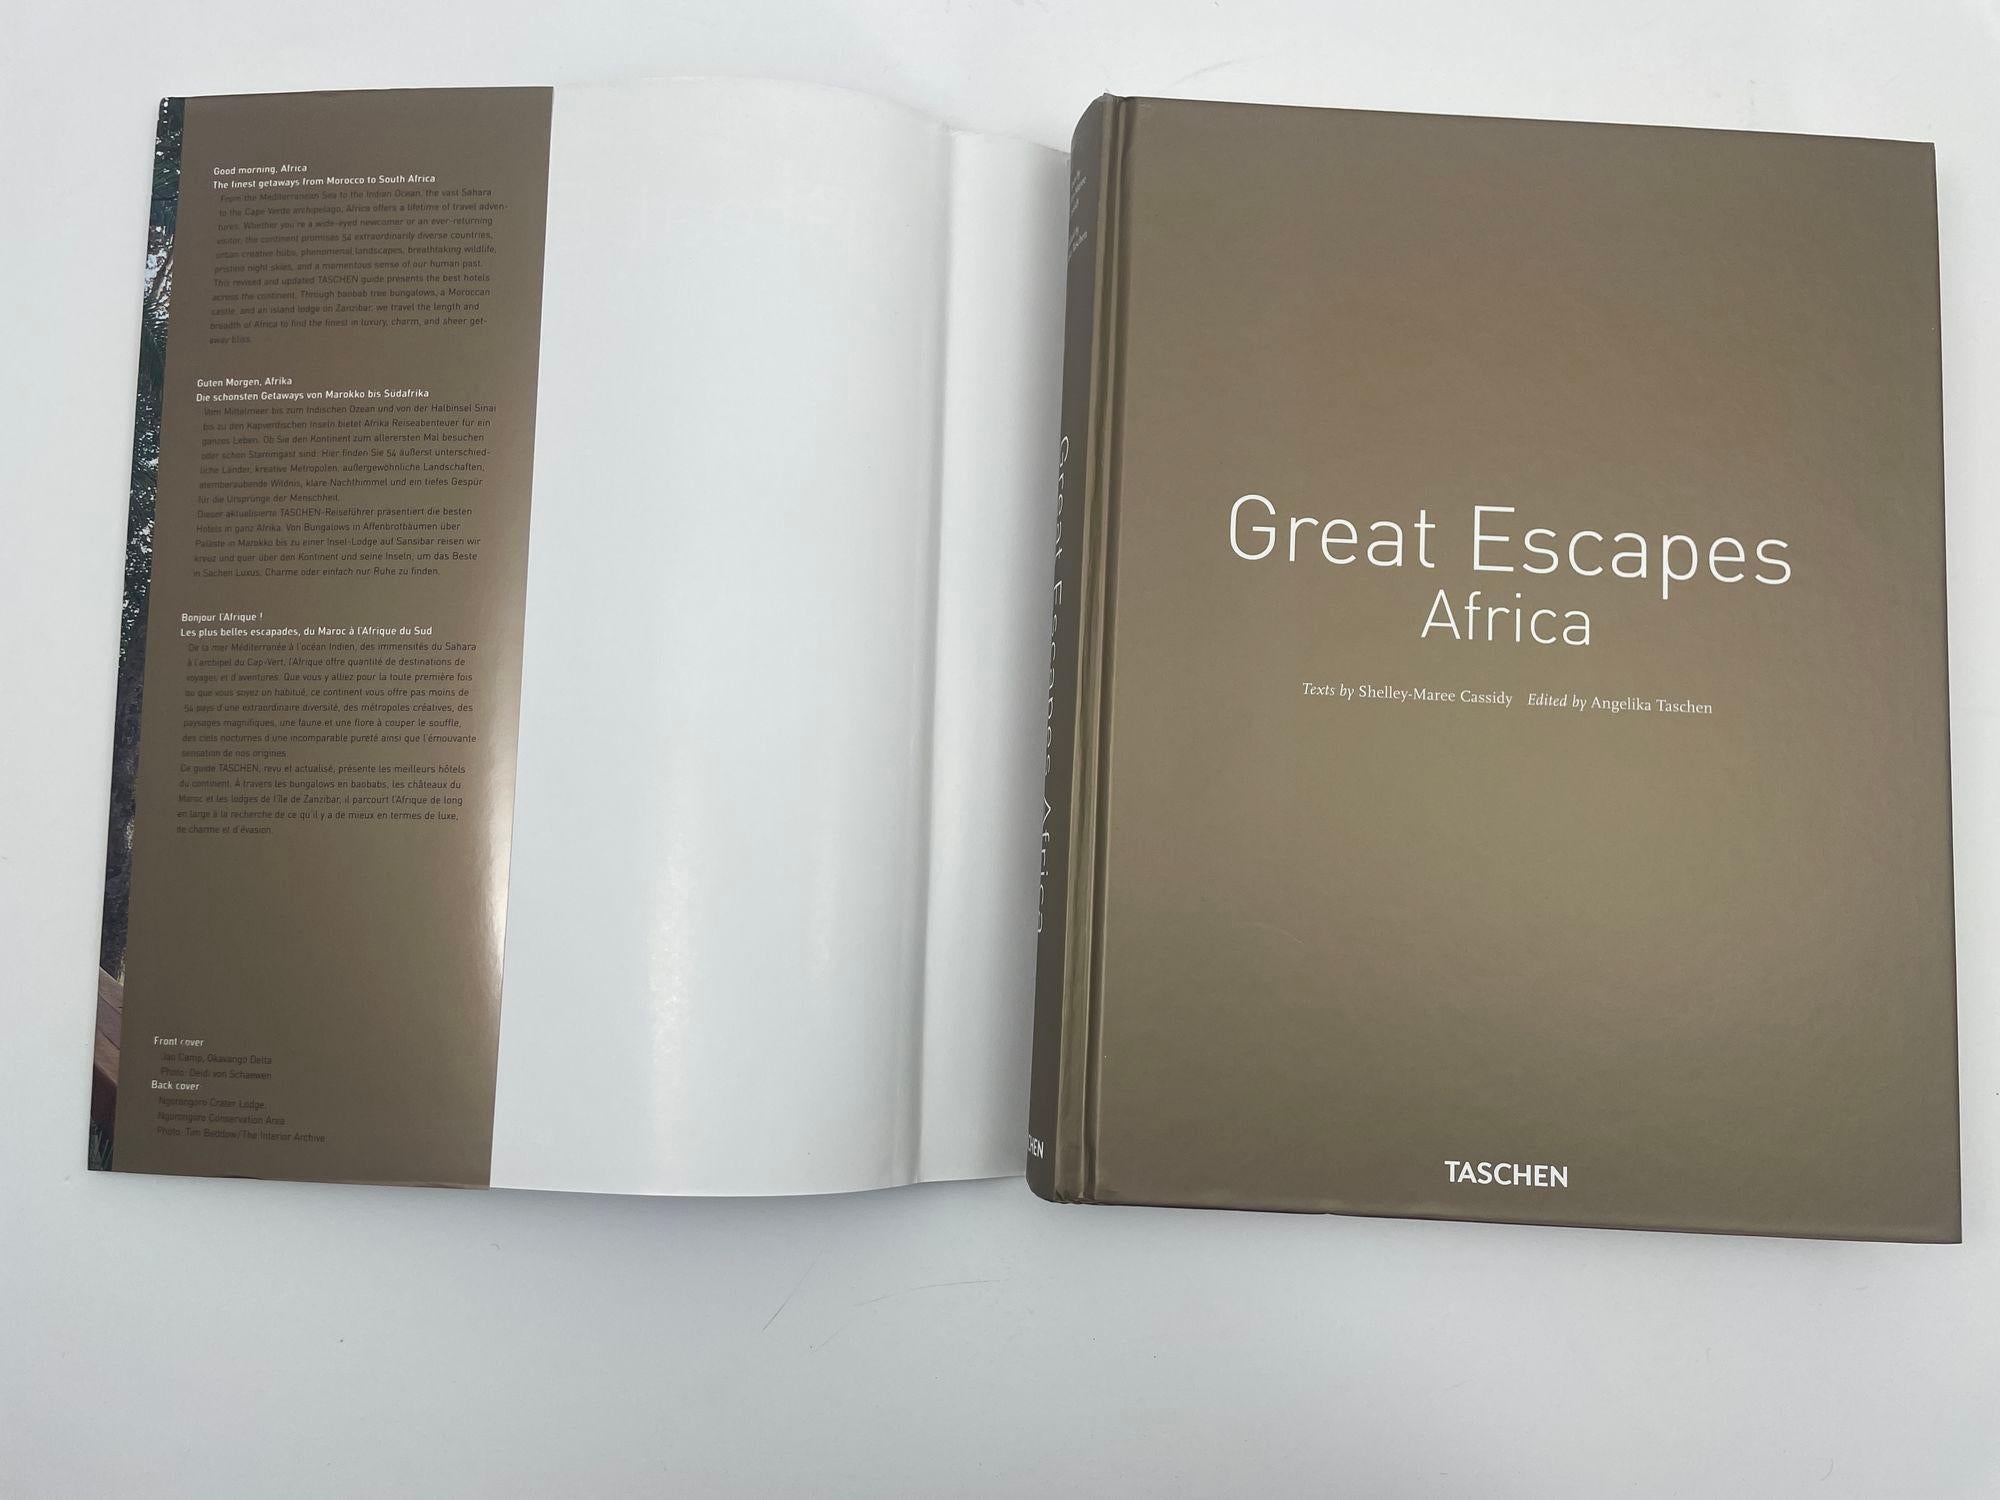 Great Escapes Africa, the Hotel Book Taschen In Good Condition For Sale In North Hollywood, CA